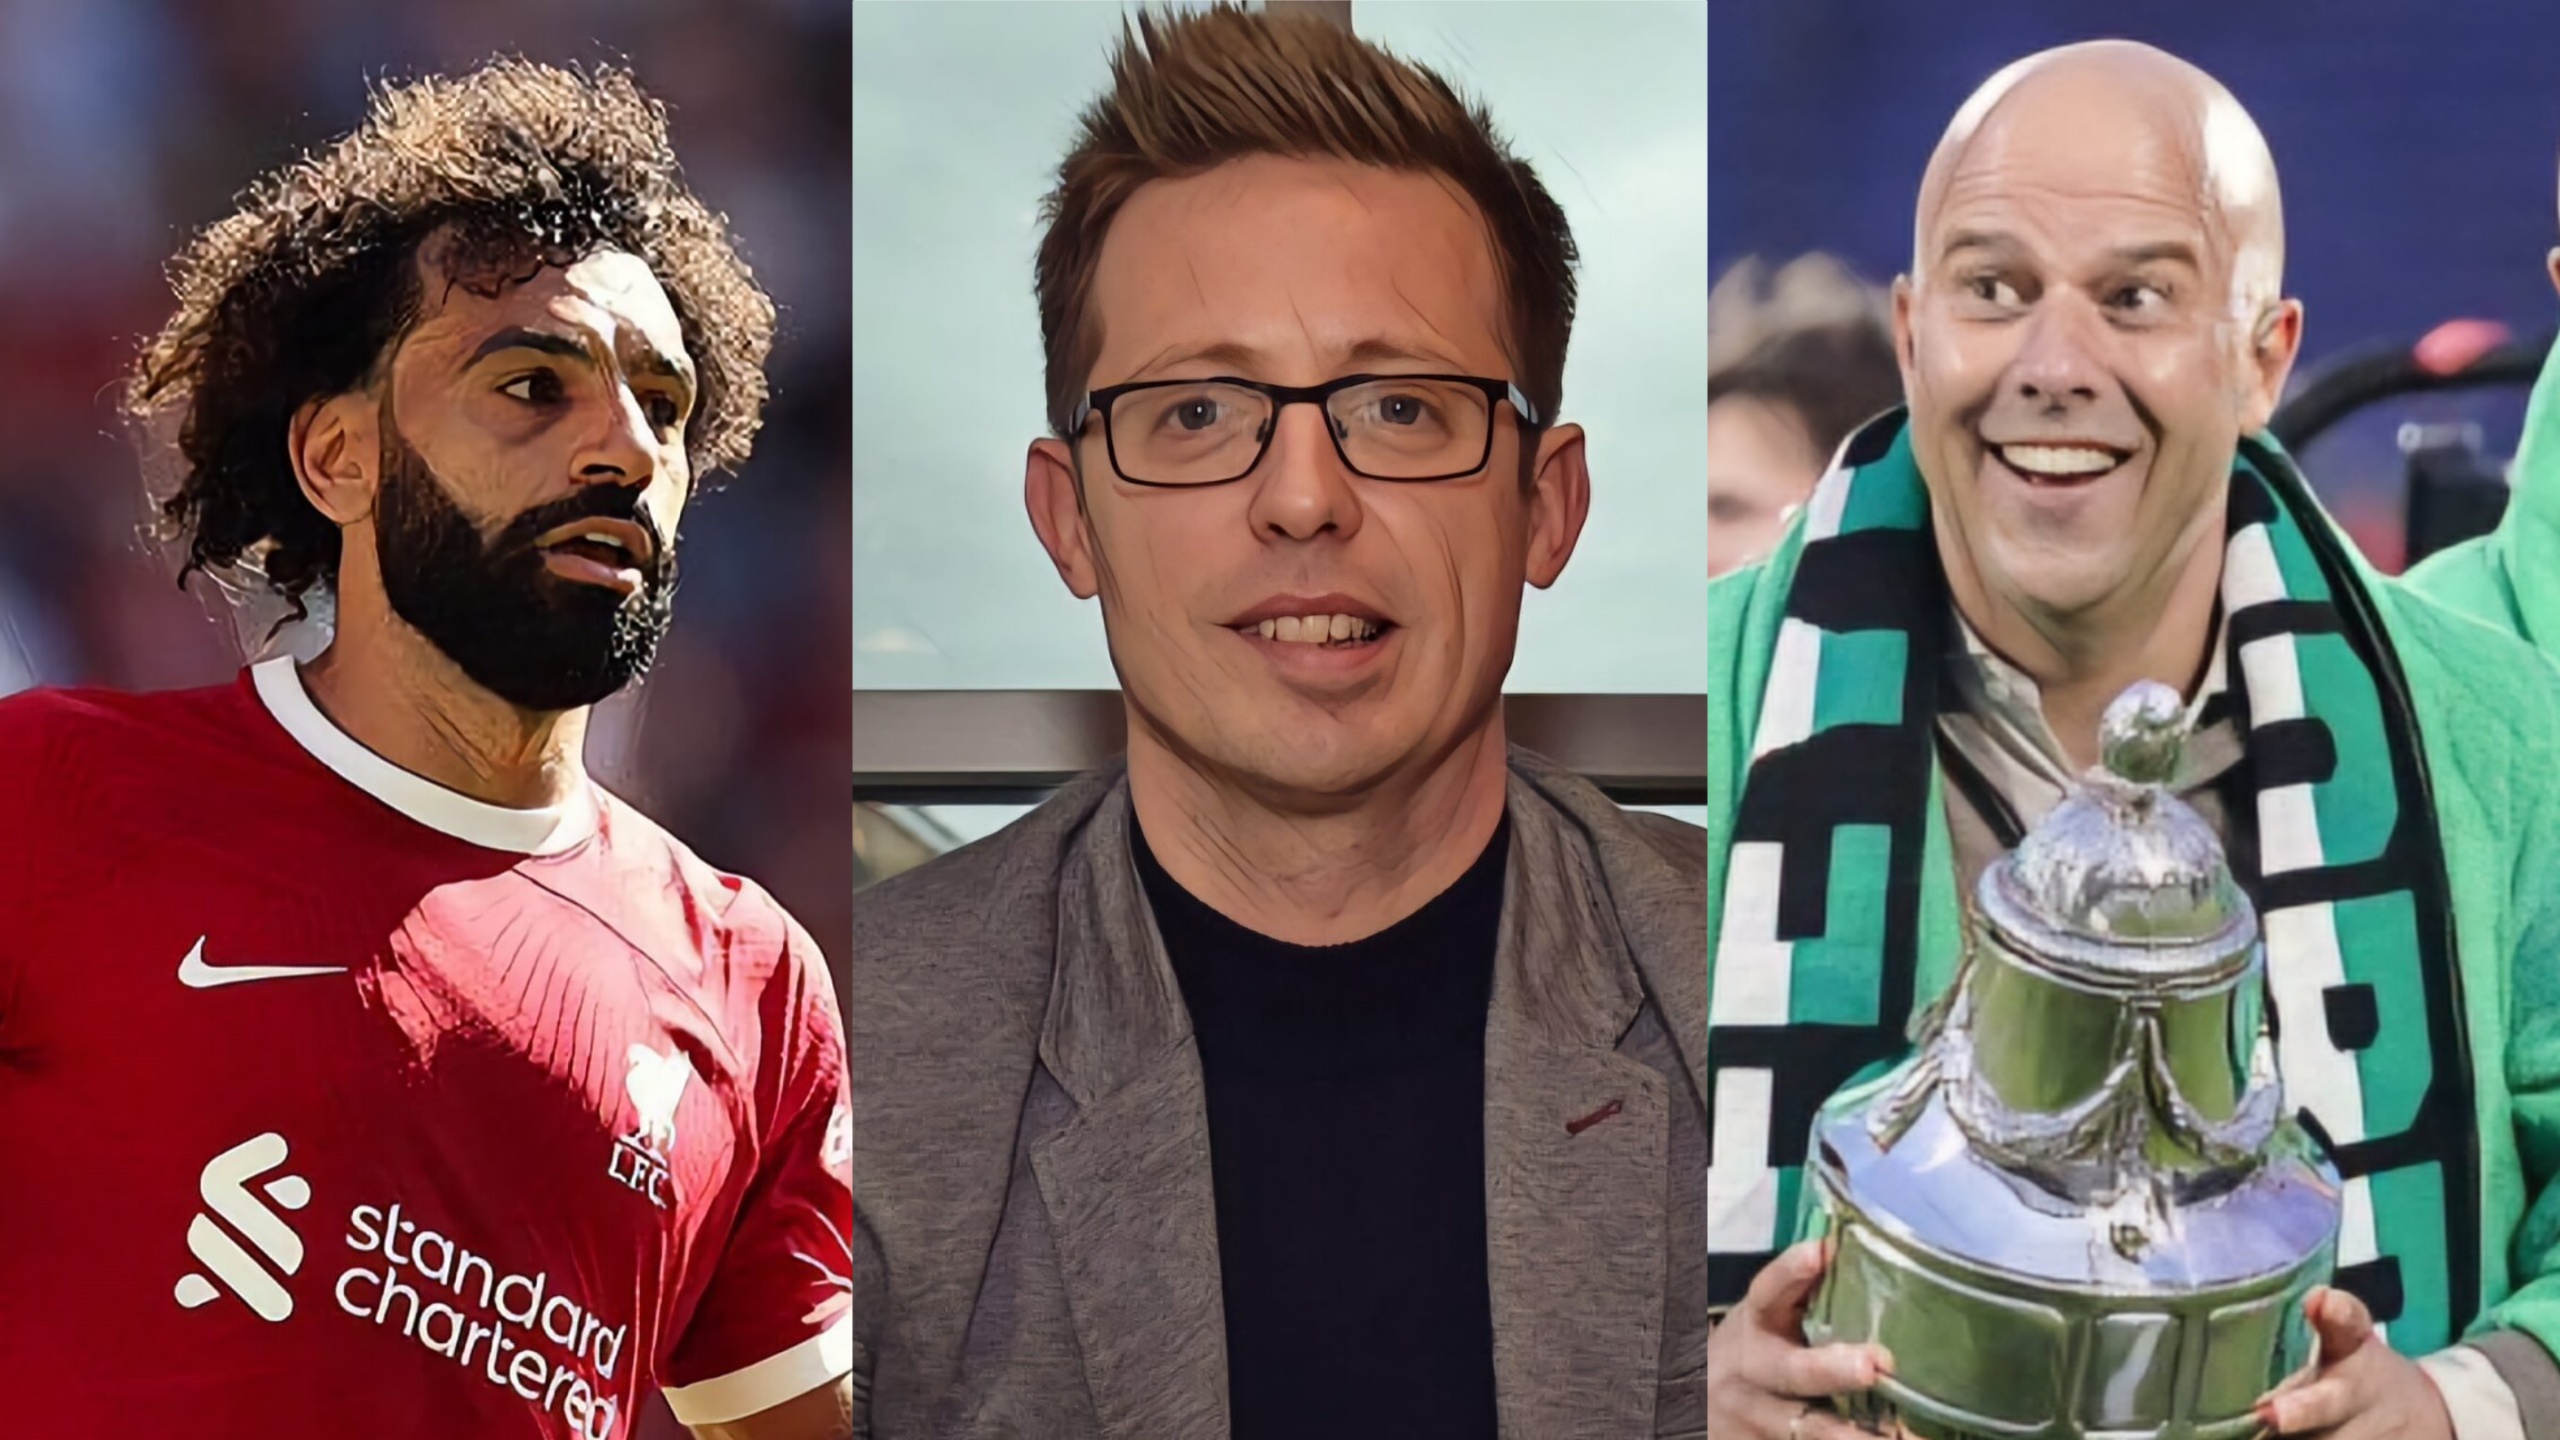 Liverpool player Mo Salah, CEO of Football Michael Edwards, and manager Arne Slot.